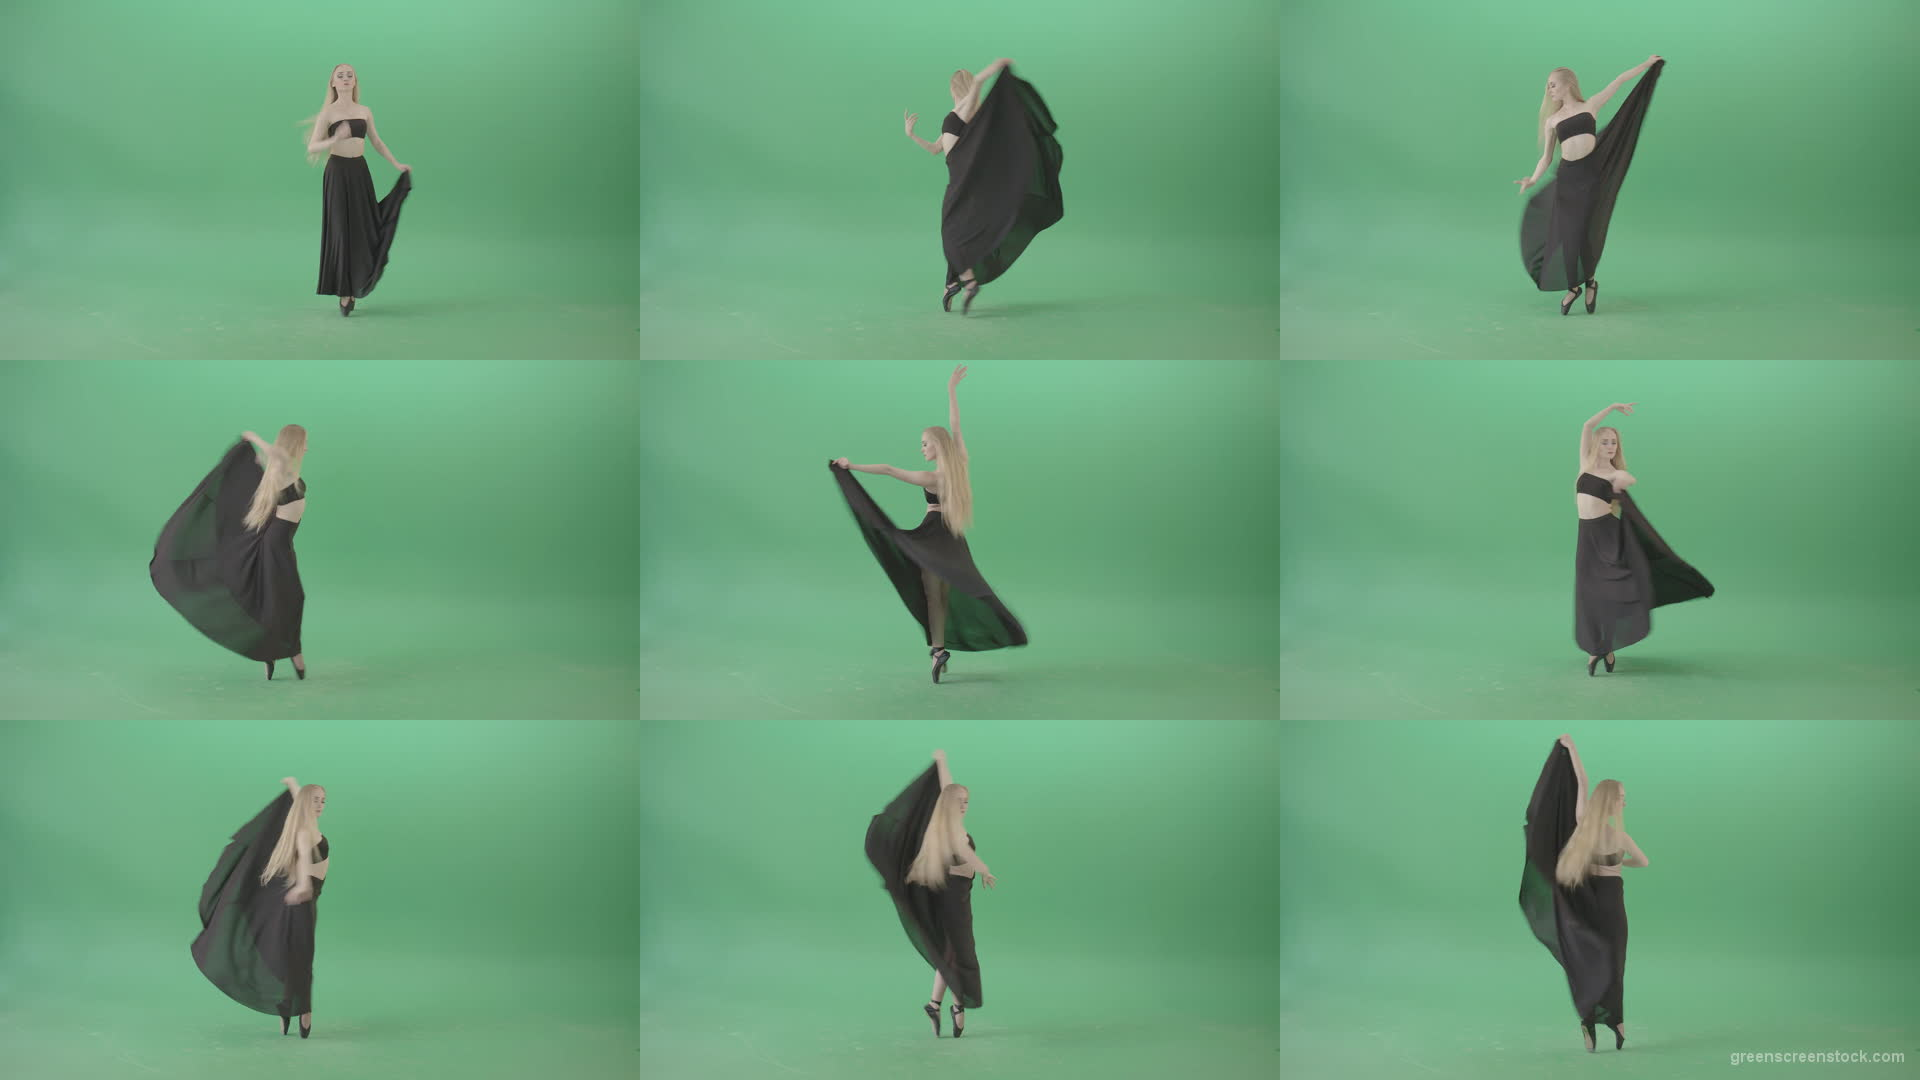 Spinning-isolated-on-green-screen-ballet-young-woman-ballerin-in-black-costume-4K-Video-Footage-1920 Green Screen Stock